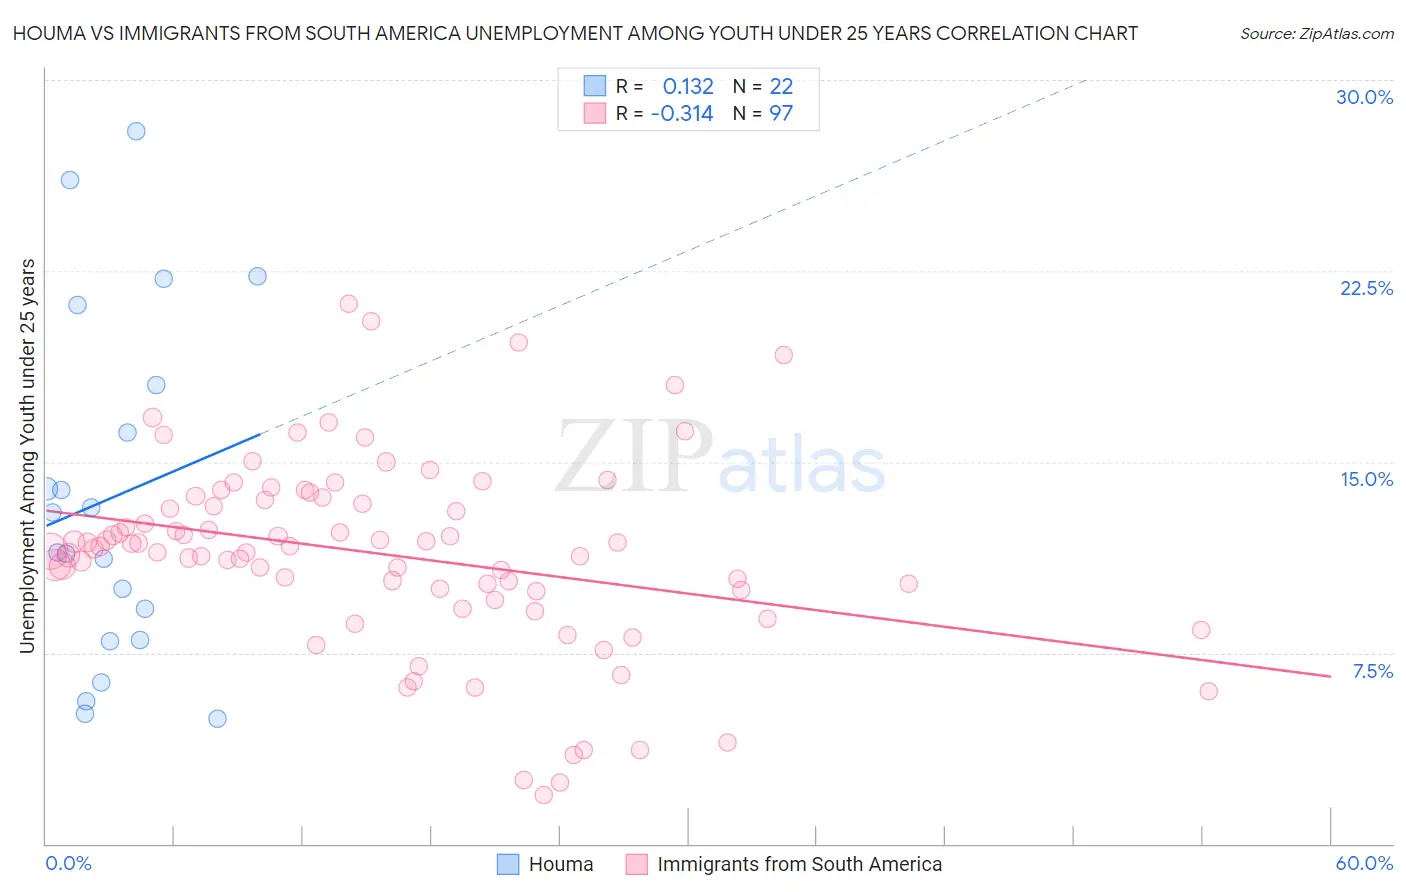 Houma vs Immigrants from South America Unemployment Among Youth under 25 years